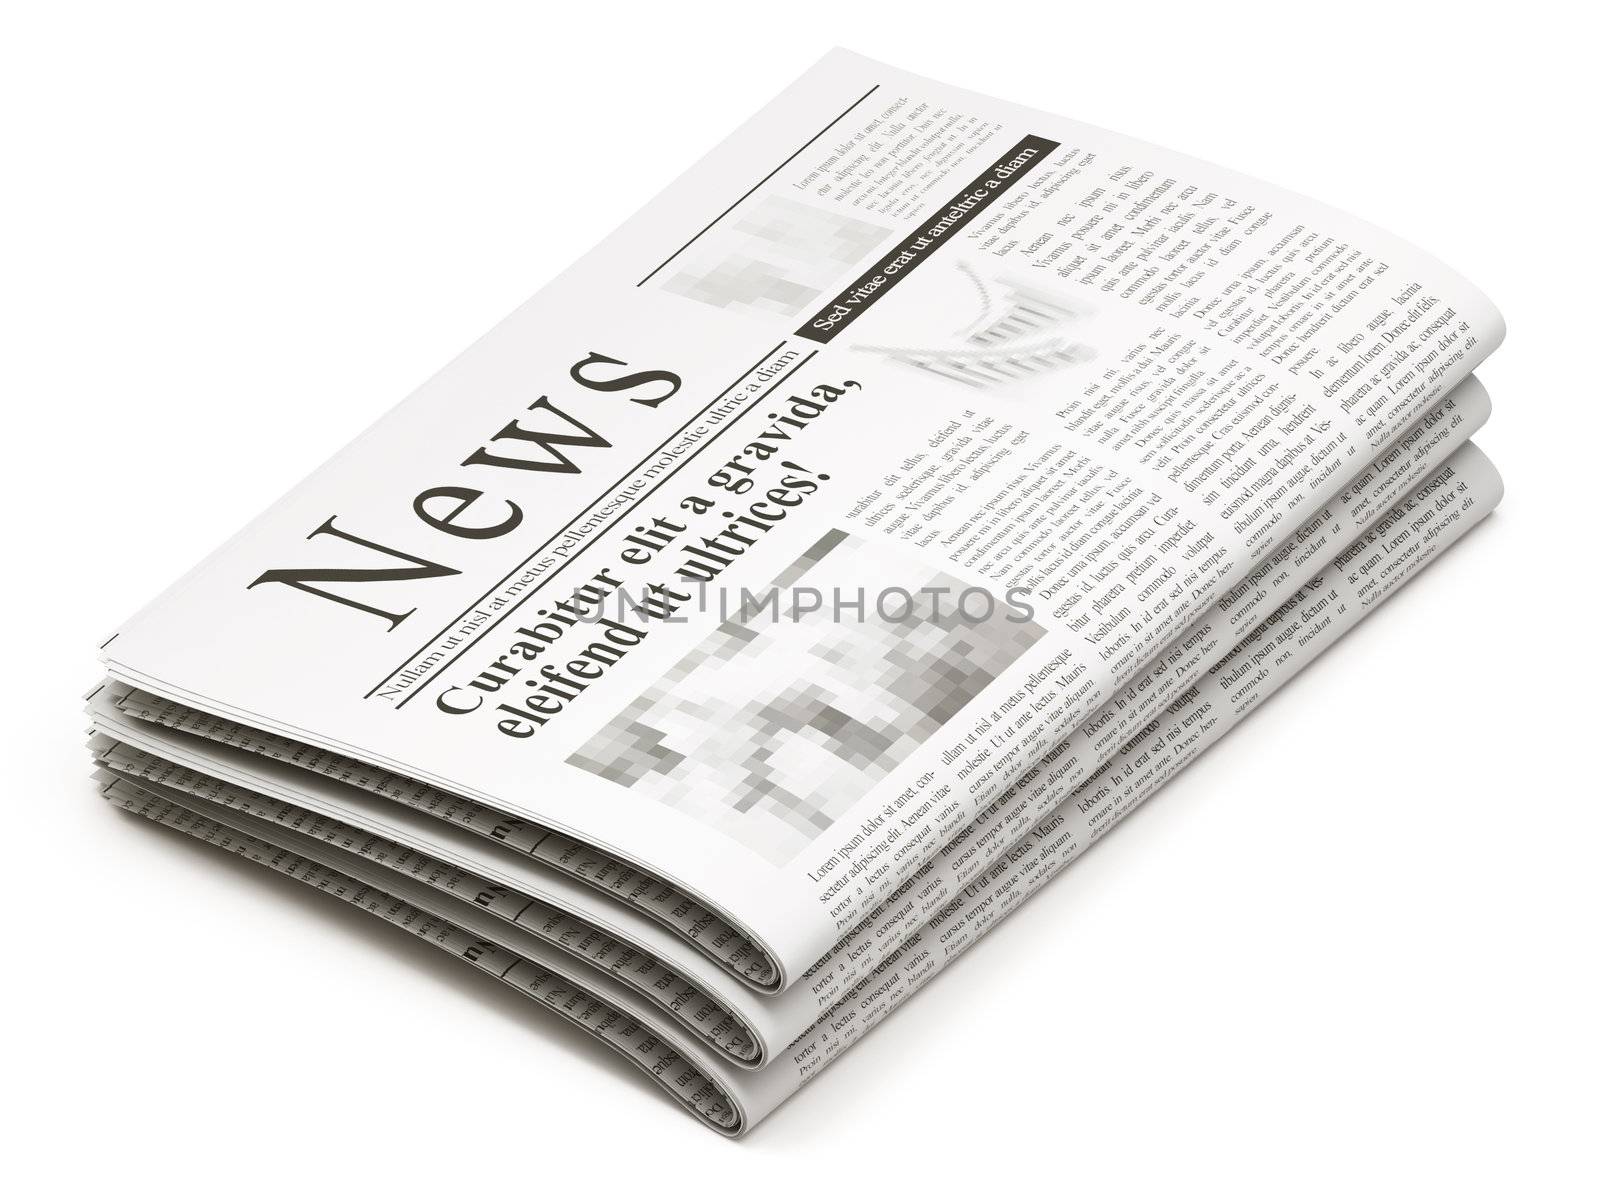 Newspapers stack on white background